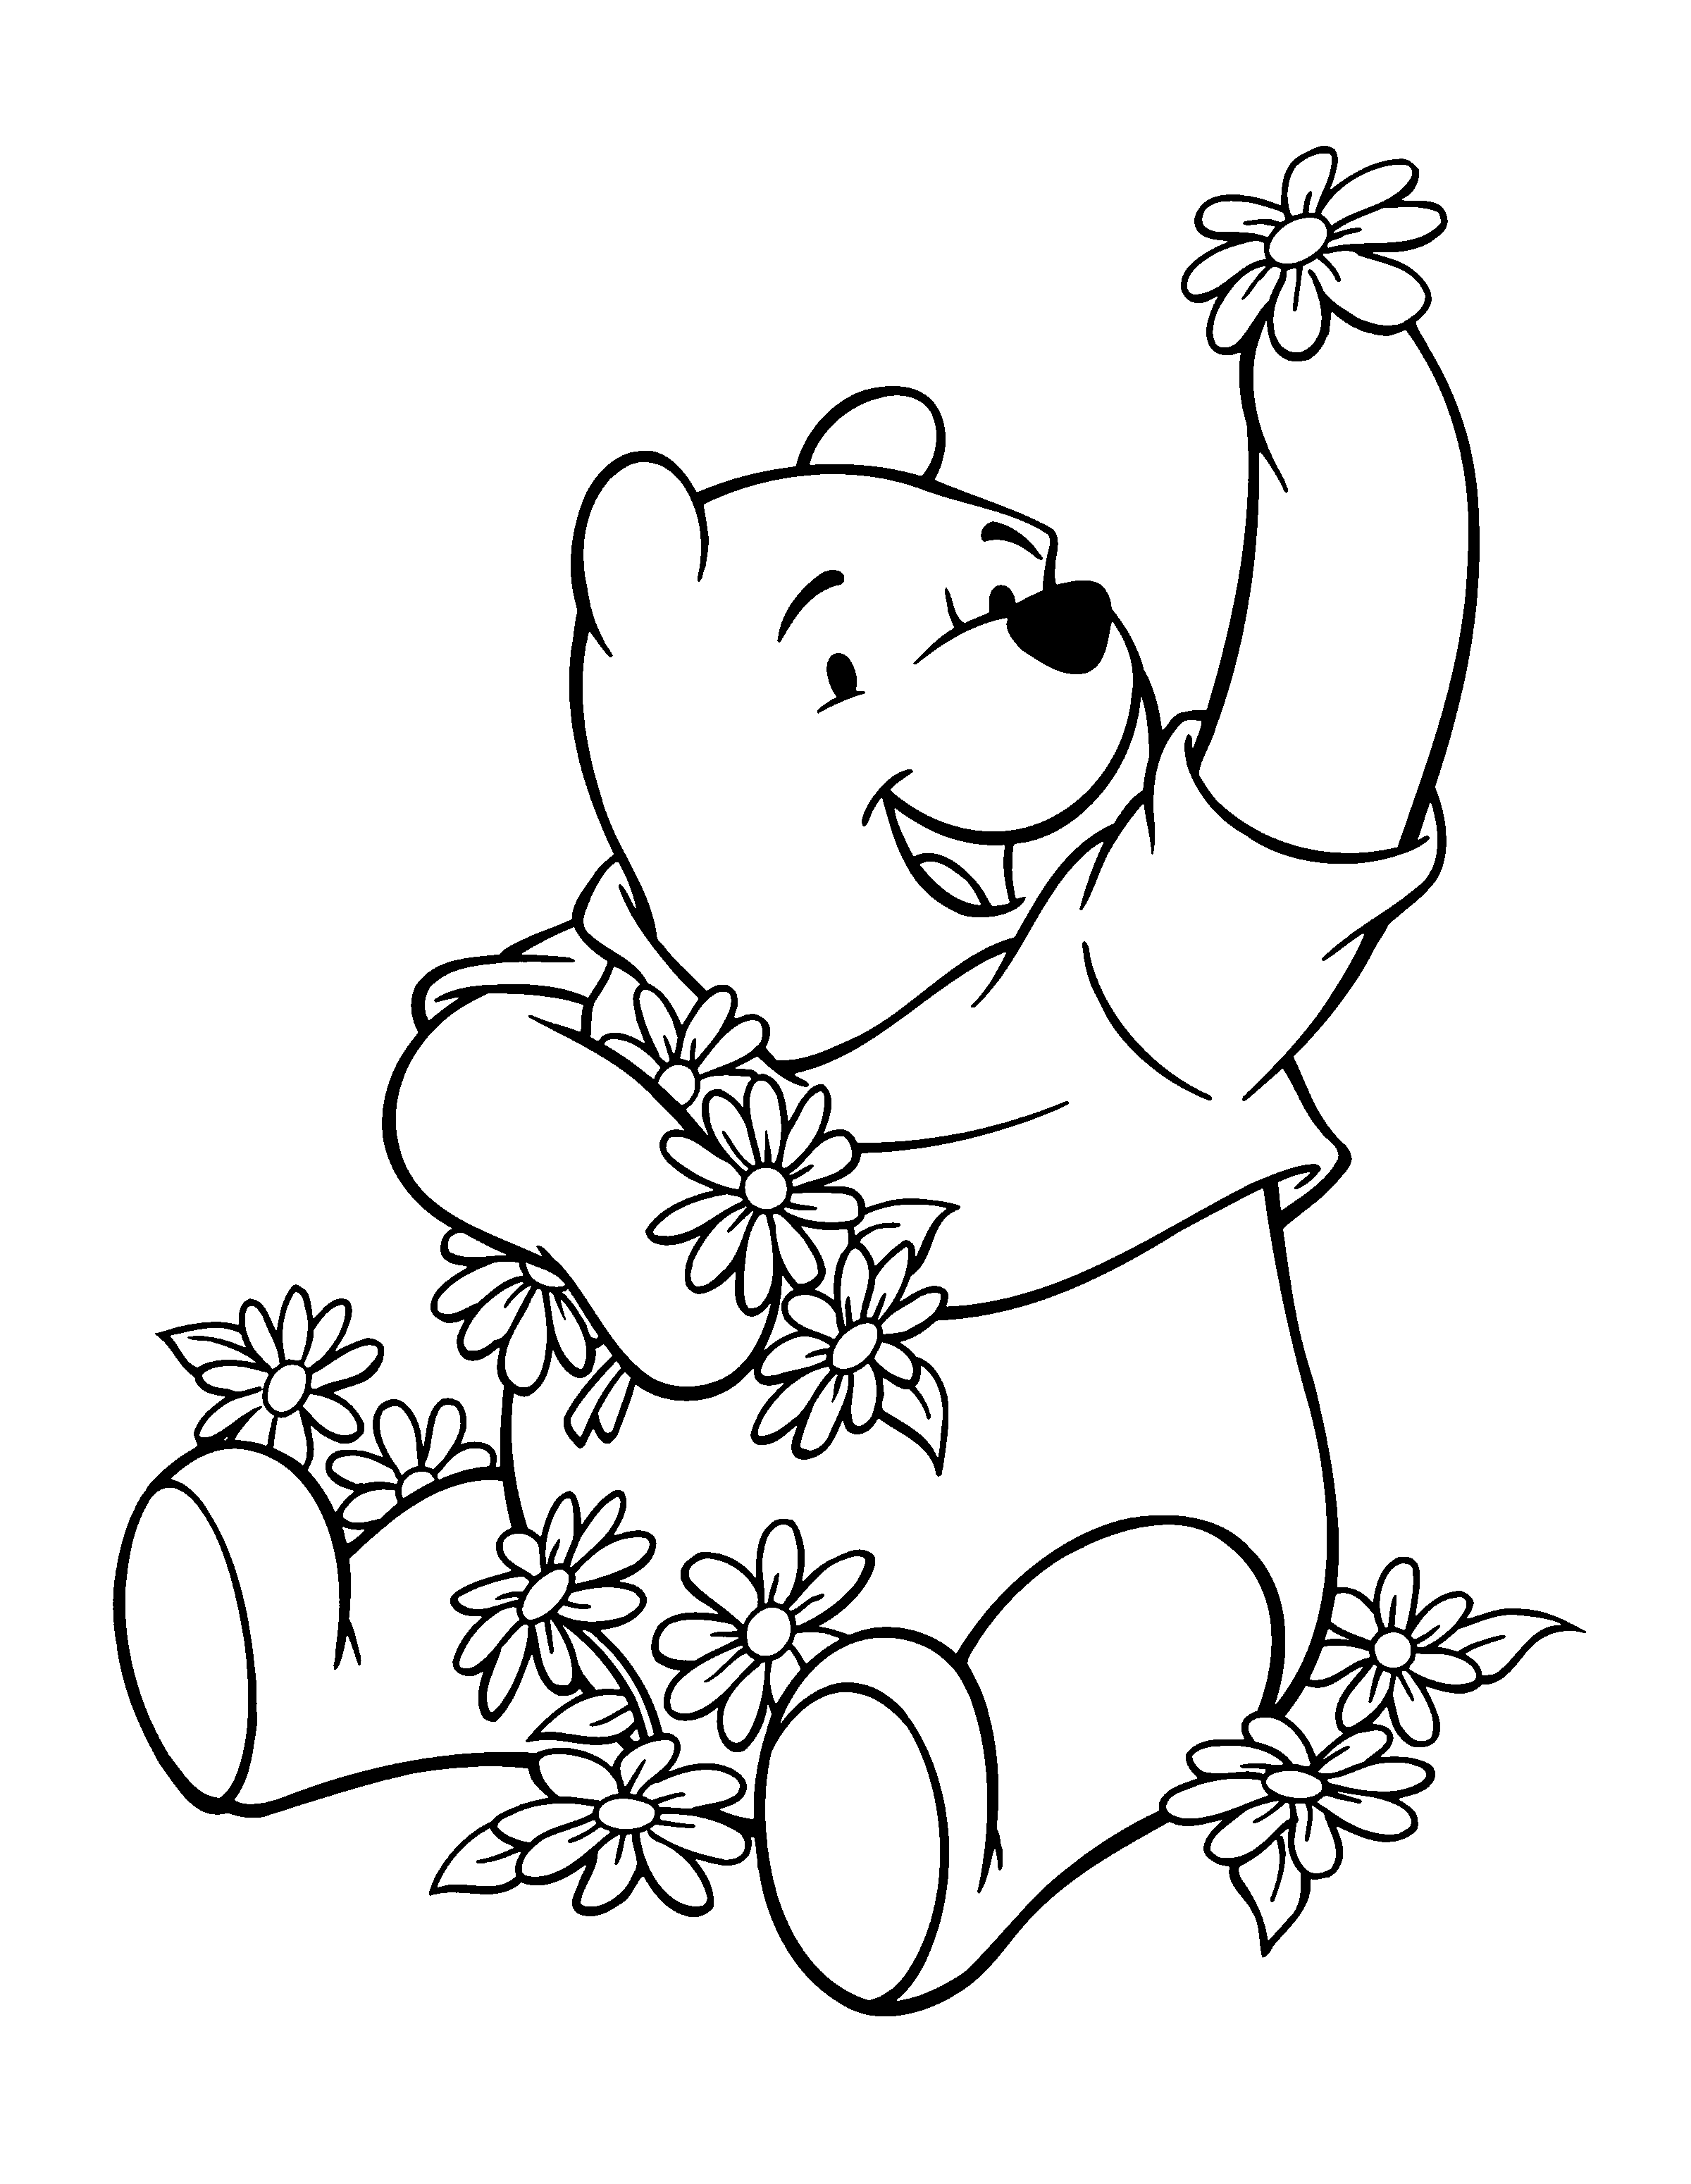 winnie pooh coloring pages